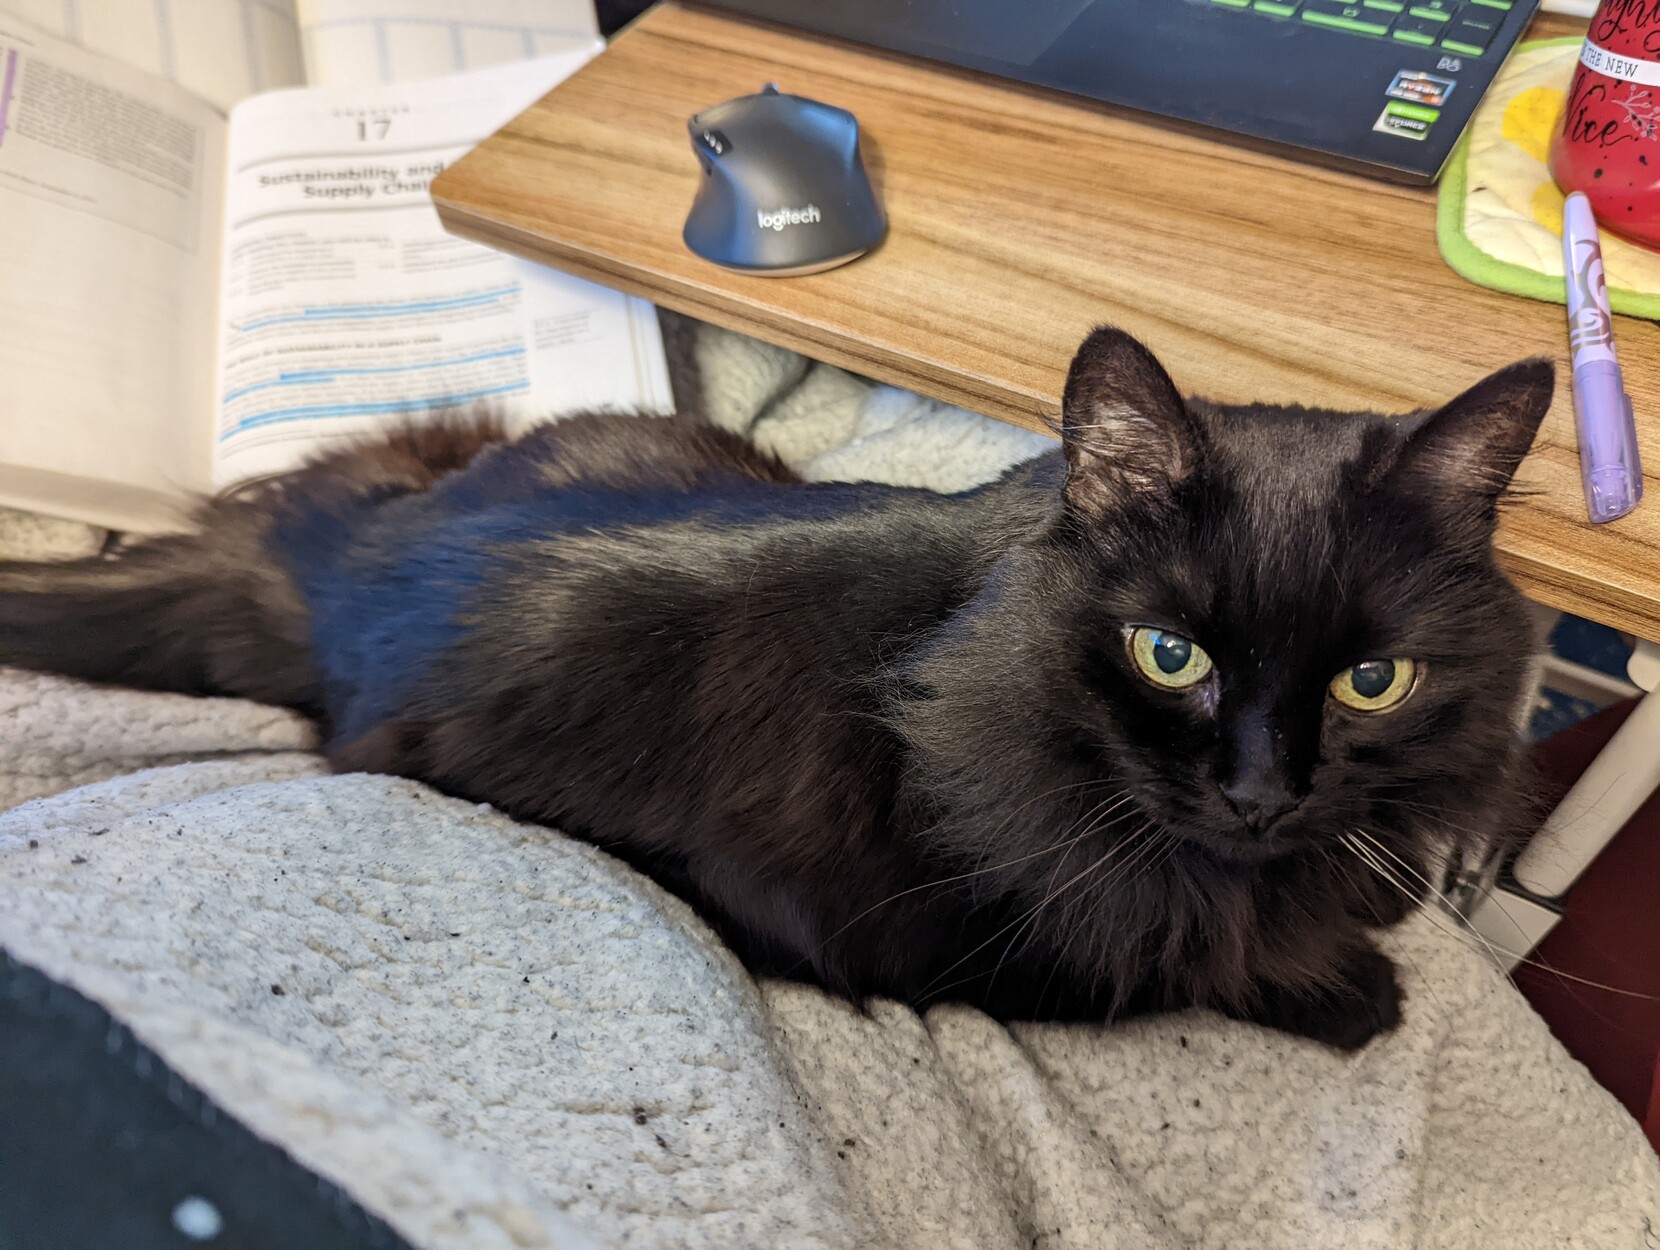 A fluffy black cat with yellow eyes is lying on a blanket in the photographer's lap, between the photographer and a desk. Visible behind the cat are a textbook and planner she shoved out of the way. On the desk are a laptop and mouse, which would be difficult to access given the location of the cat.